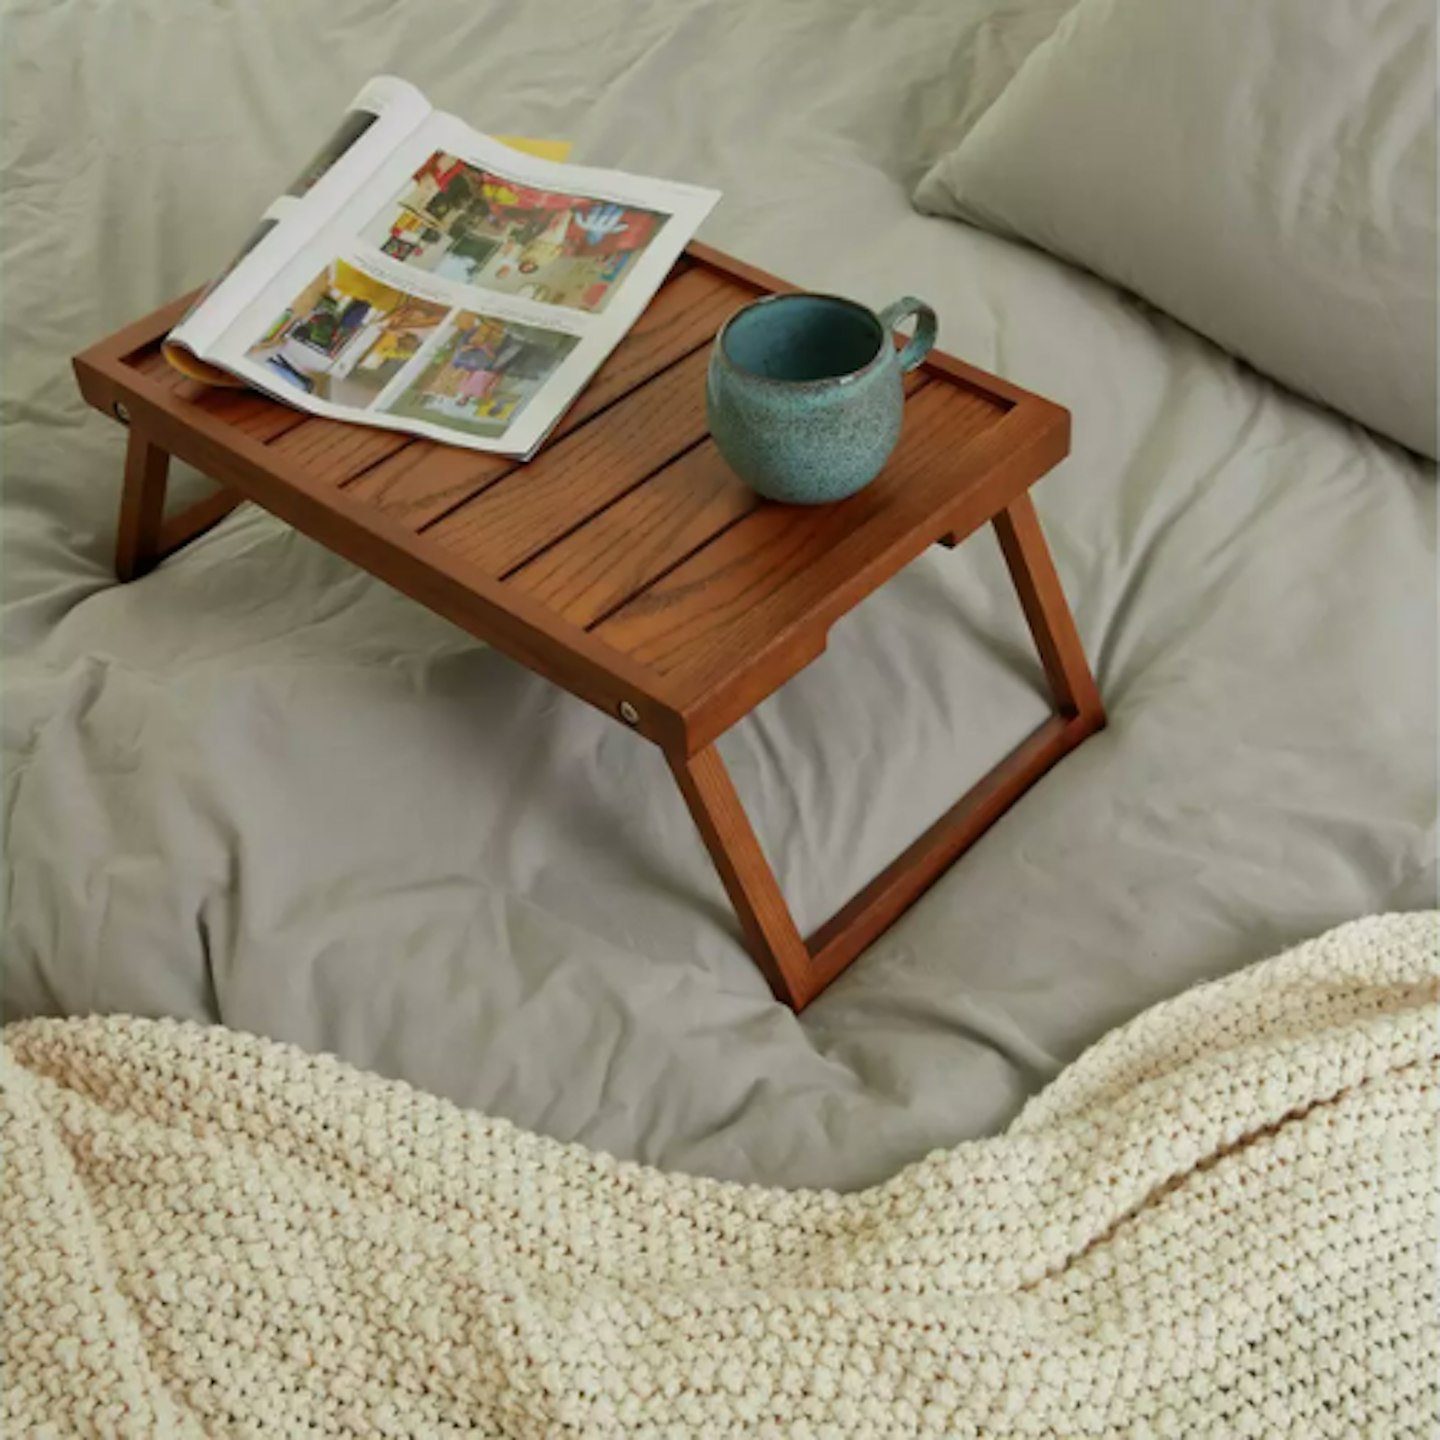 Bed Trays Eating Table Breakfast in Bed Tray with Legs,Lap Trays Eating On  Bed